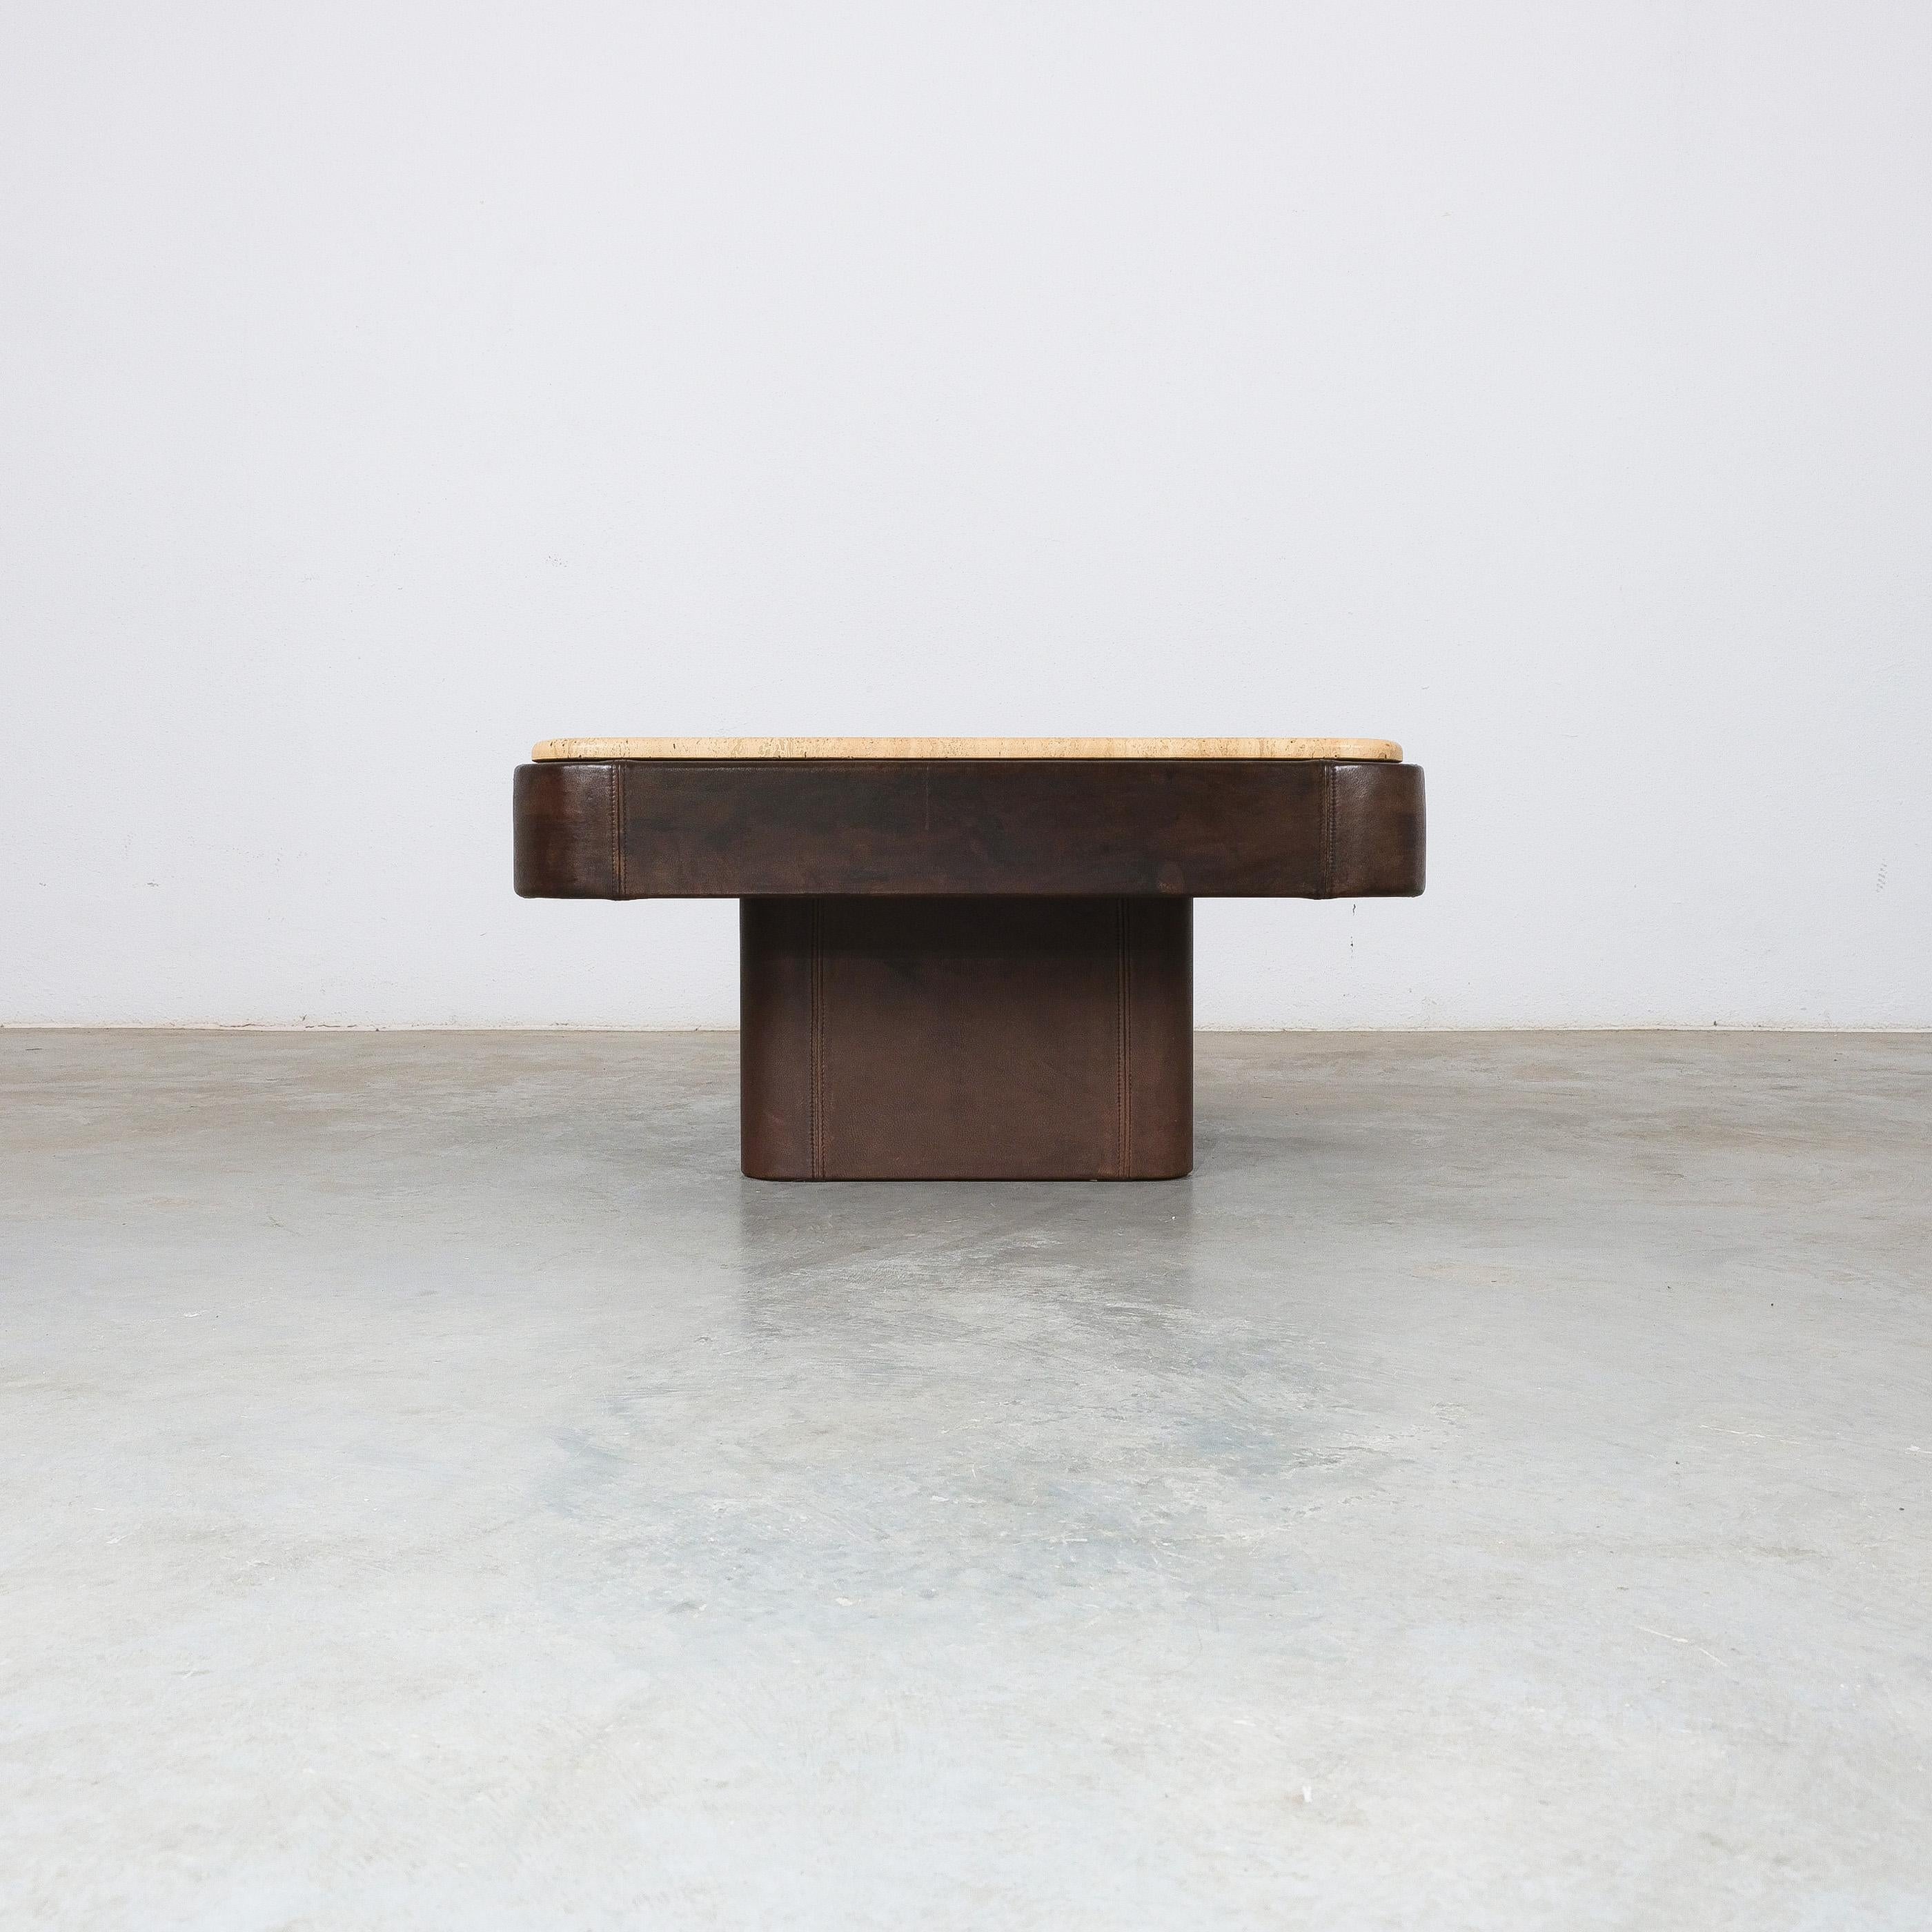 De Sede leather table with travertine stone top in very good condition, Switzerland 1970
Dimensions are: 31.5